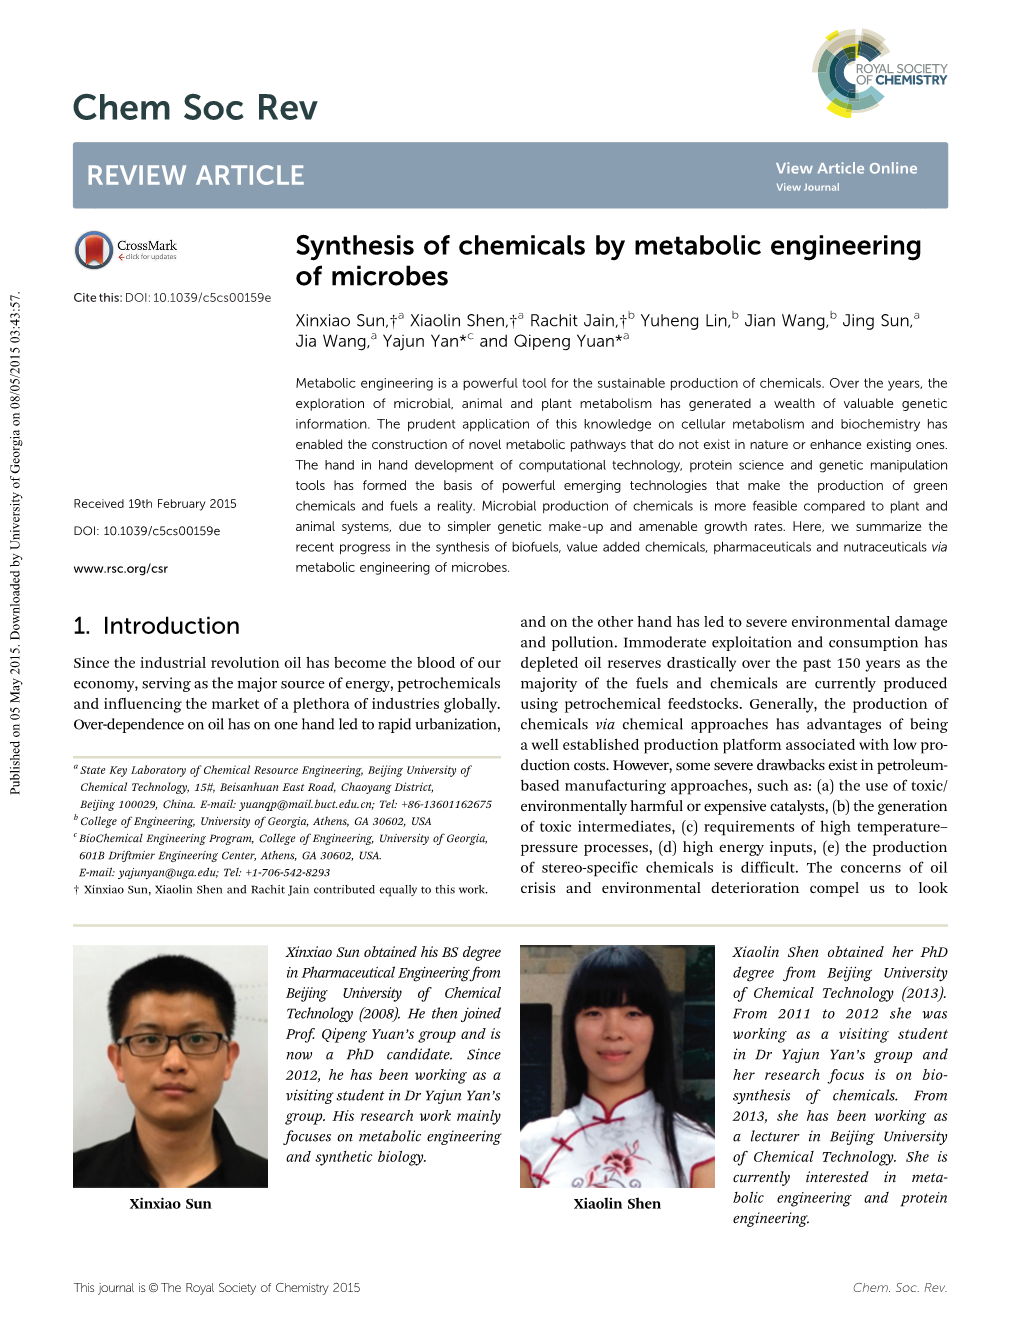 Synthesis of Chemicals by Metabolic Engineering of Microbes